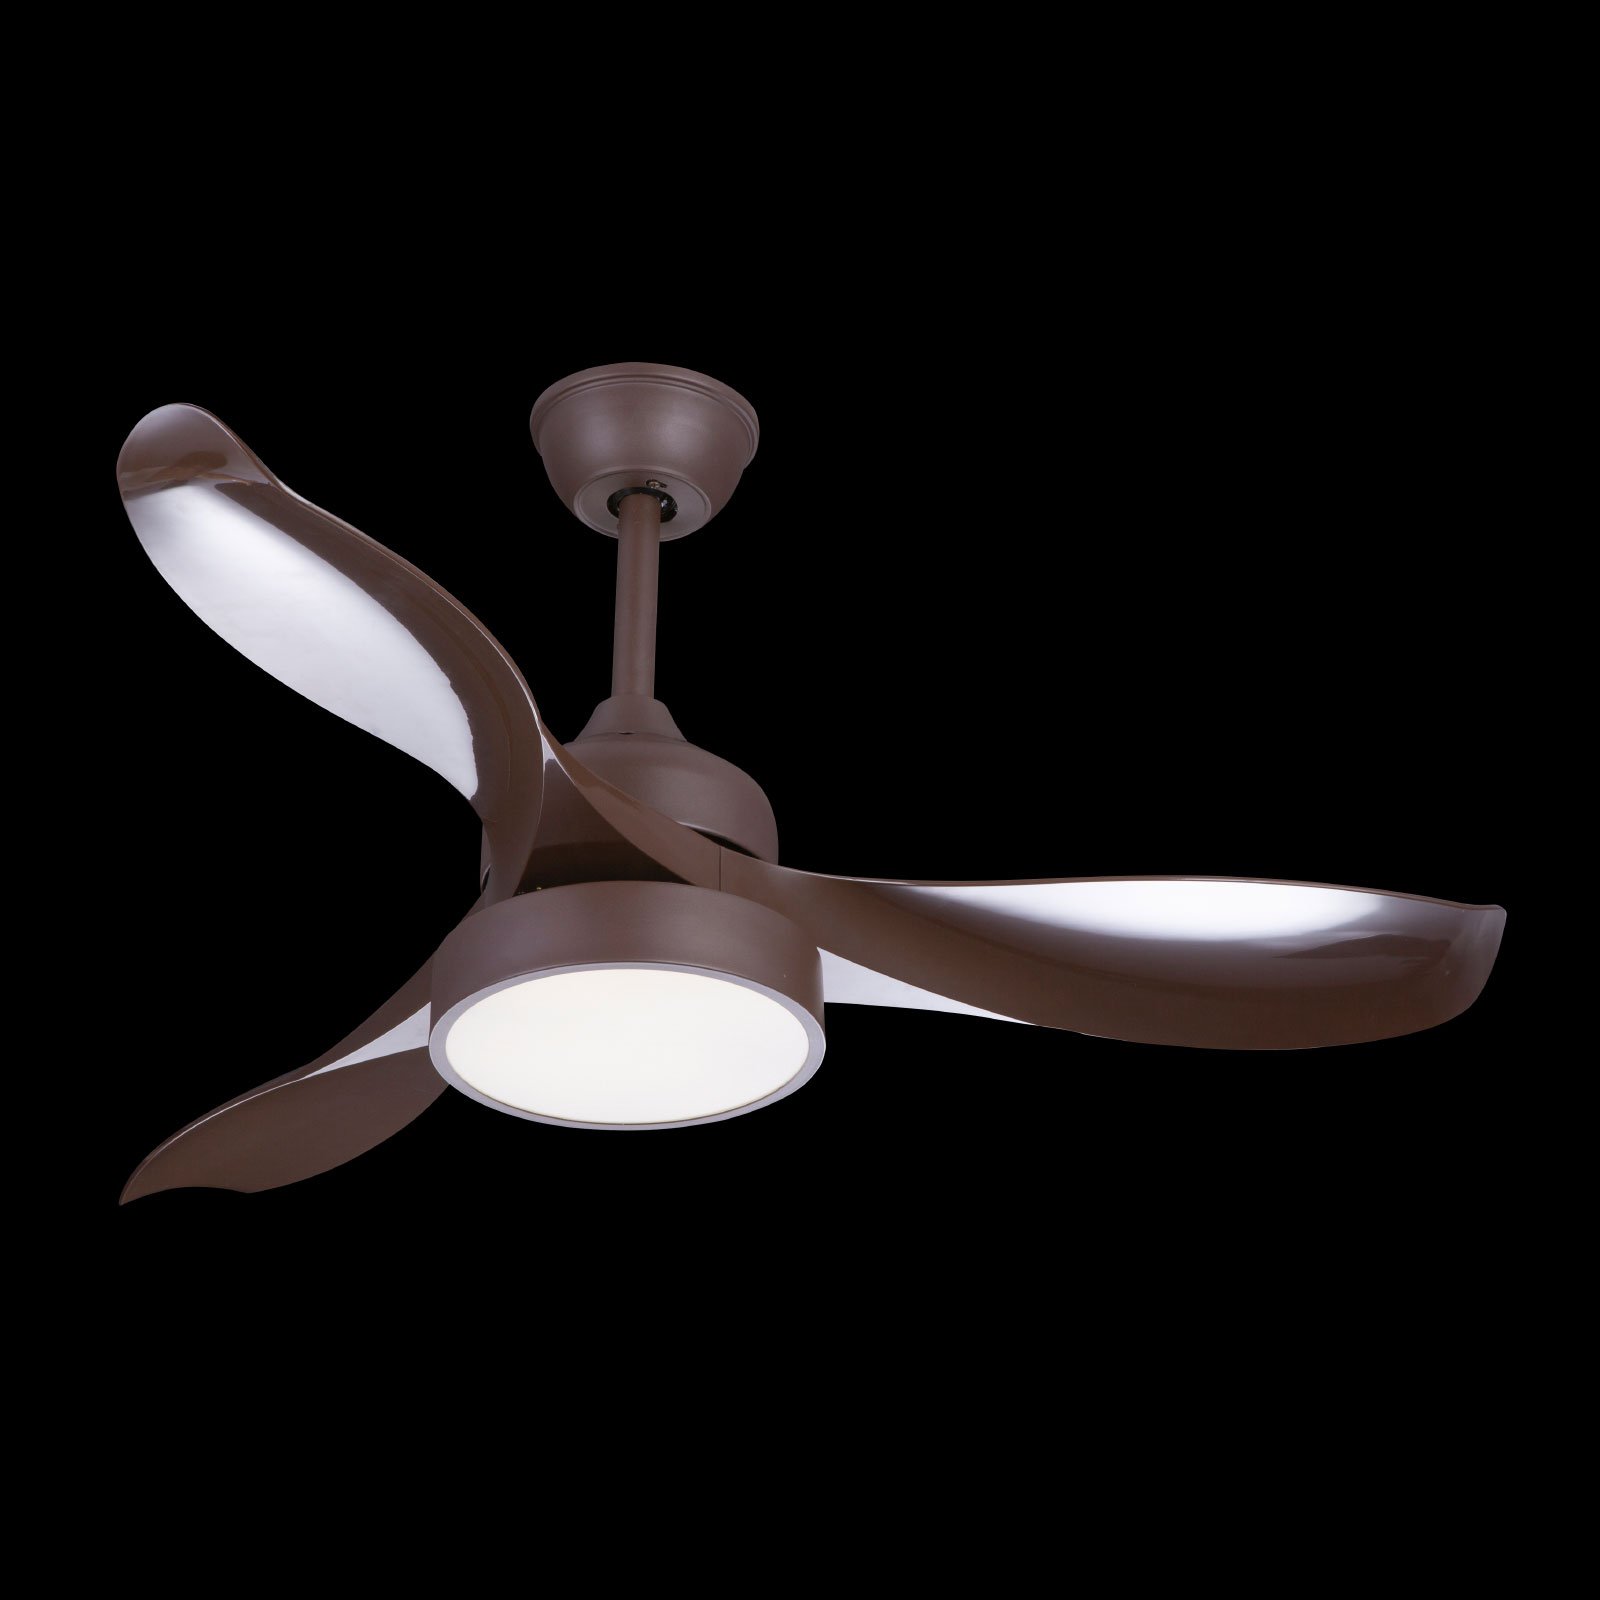 03610 ceiling fan with remote control, brown